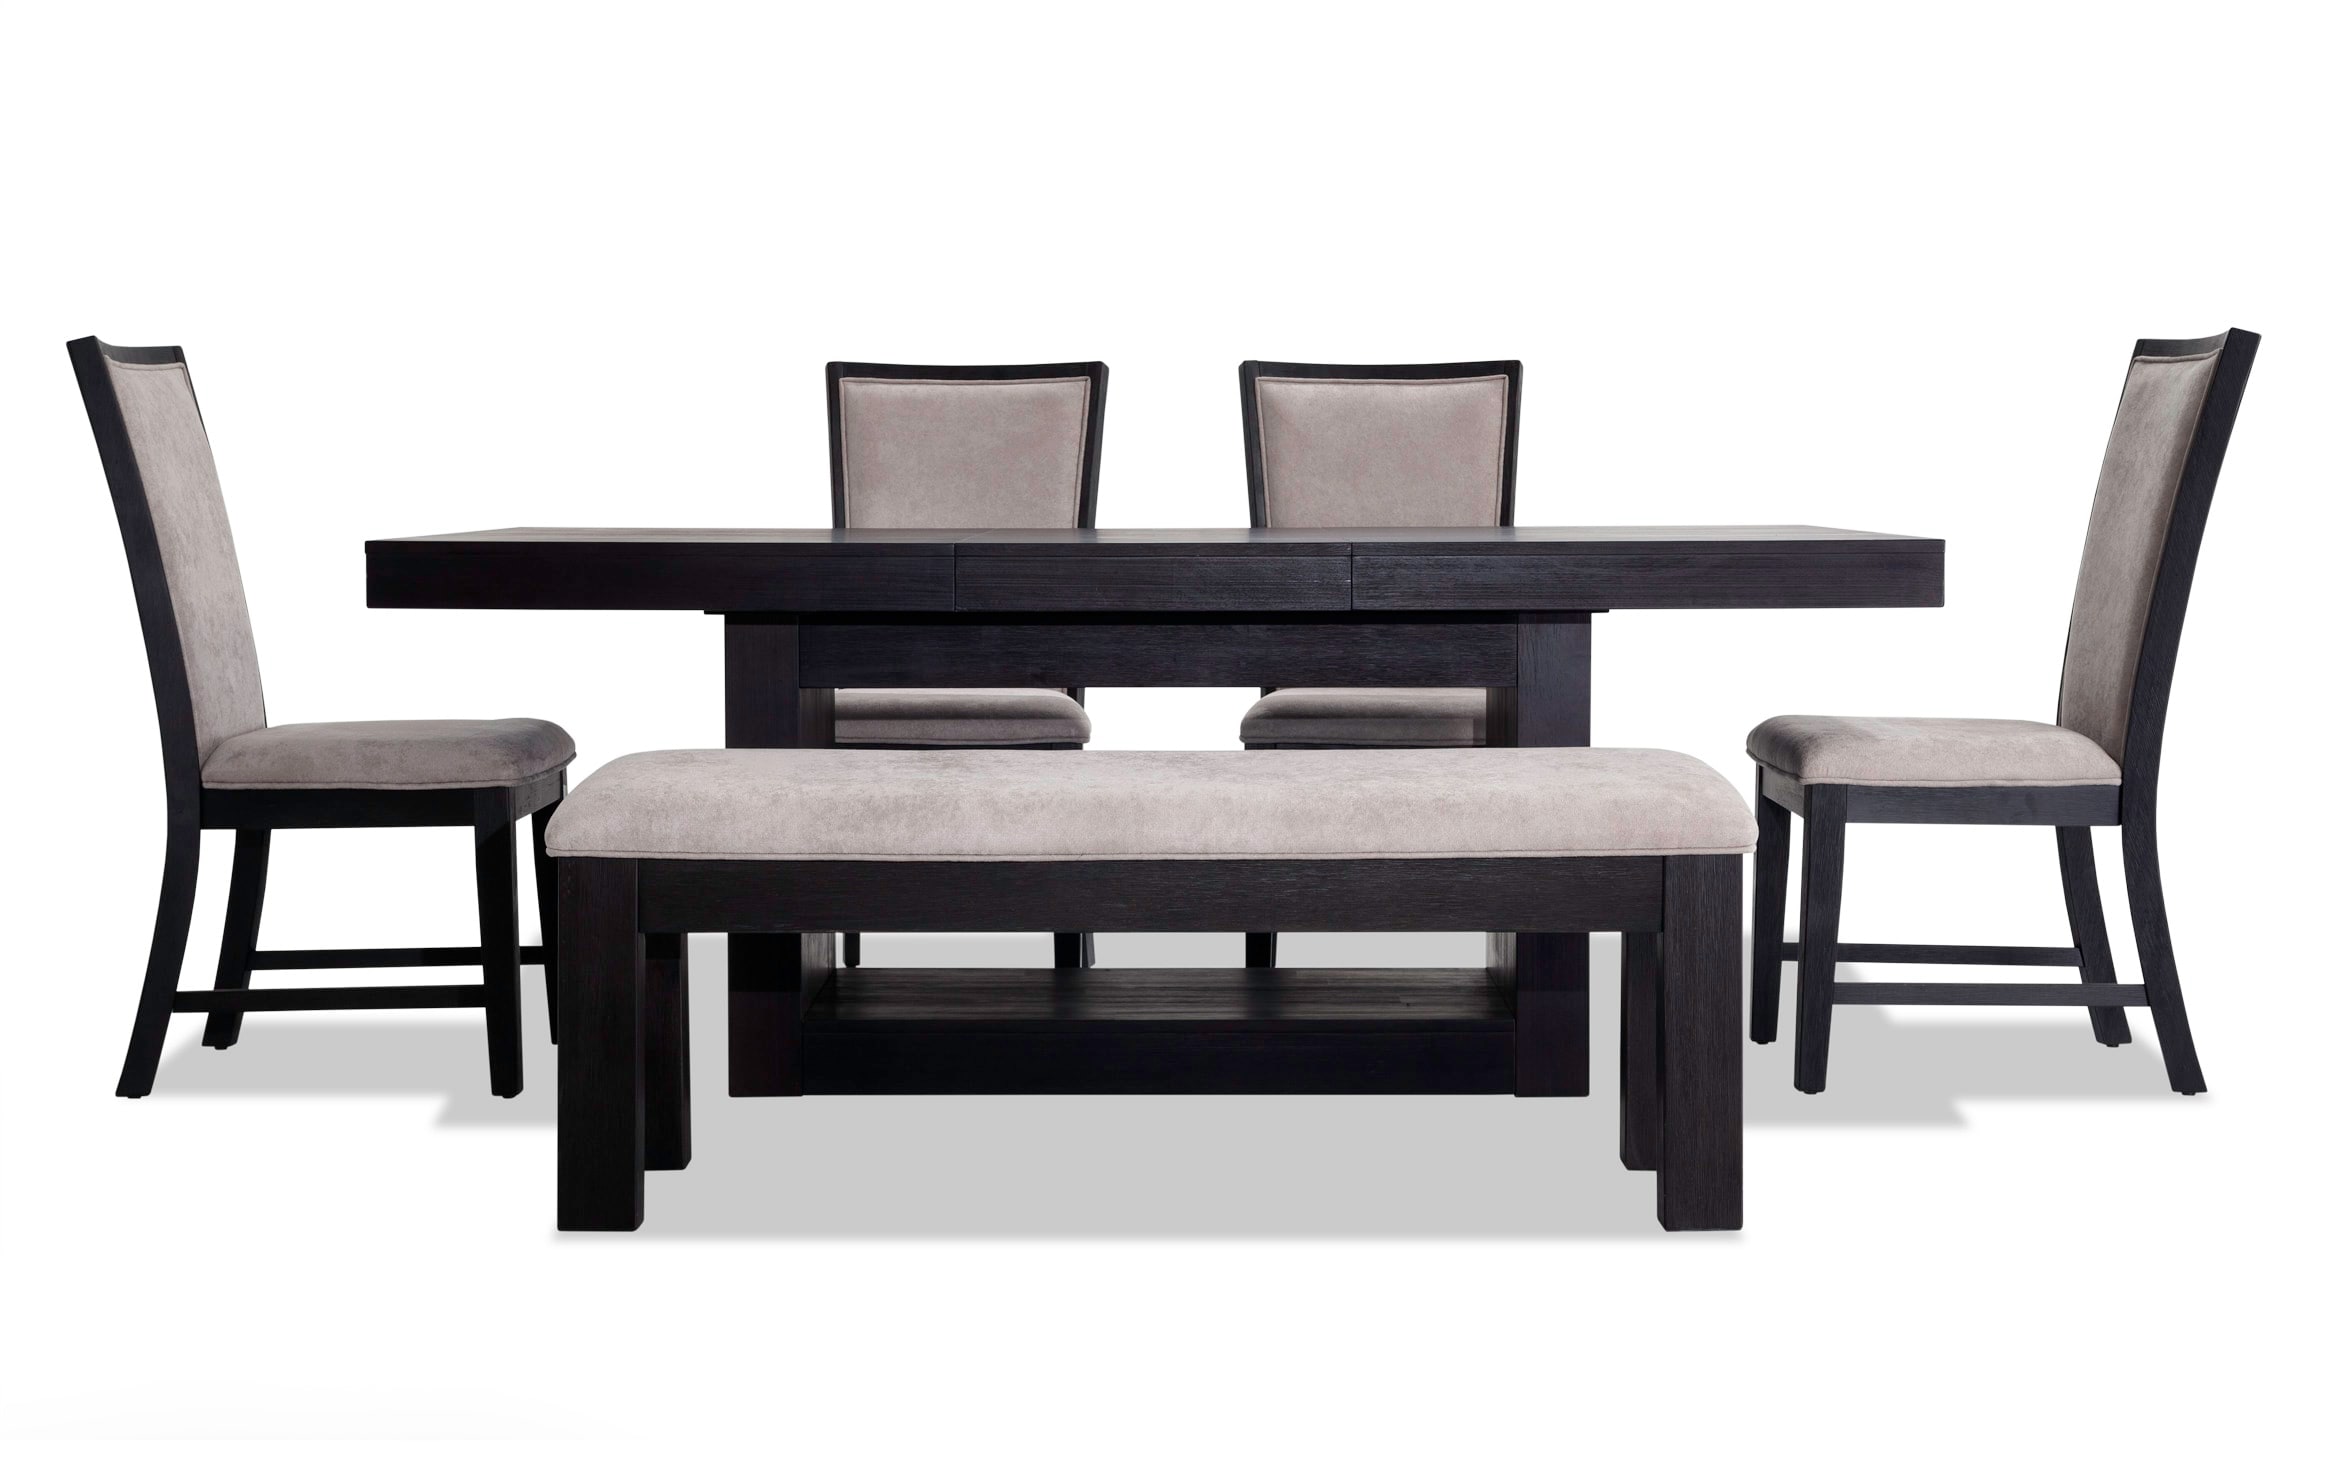 Cosmopolitan 6 Piece Dining Set With, Black Kitchen Table And Chairs Bench